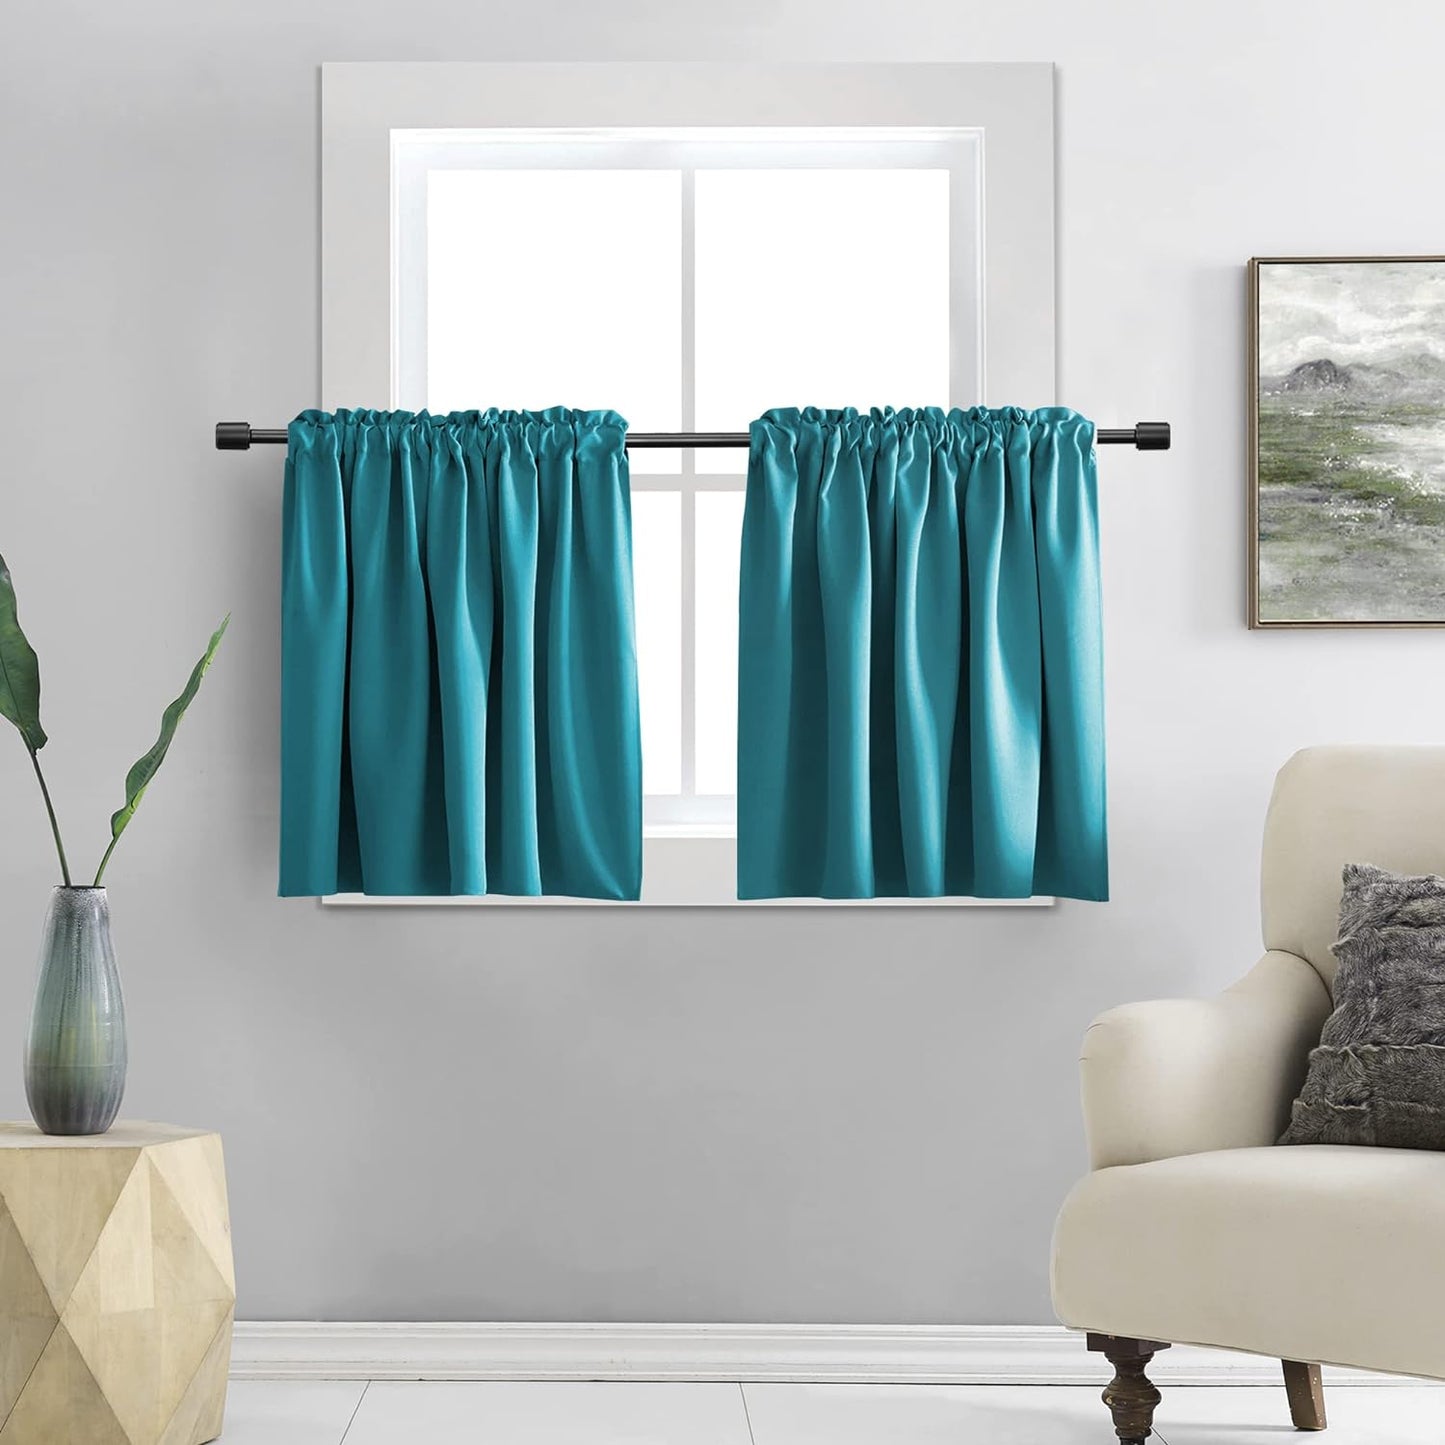 DONREN 24 Inch Length Curtains- 2 Panels Blackout Thermal Insulating Small Curtain Tiers for Bathroom with Rod Pocket (Black,42 Inch Width)  DONREN Teal 42" X 24" 